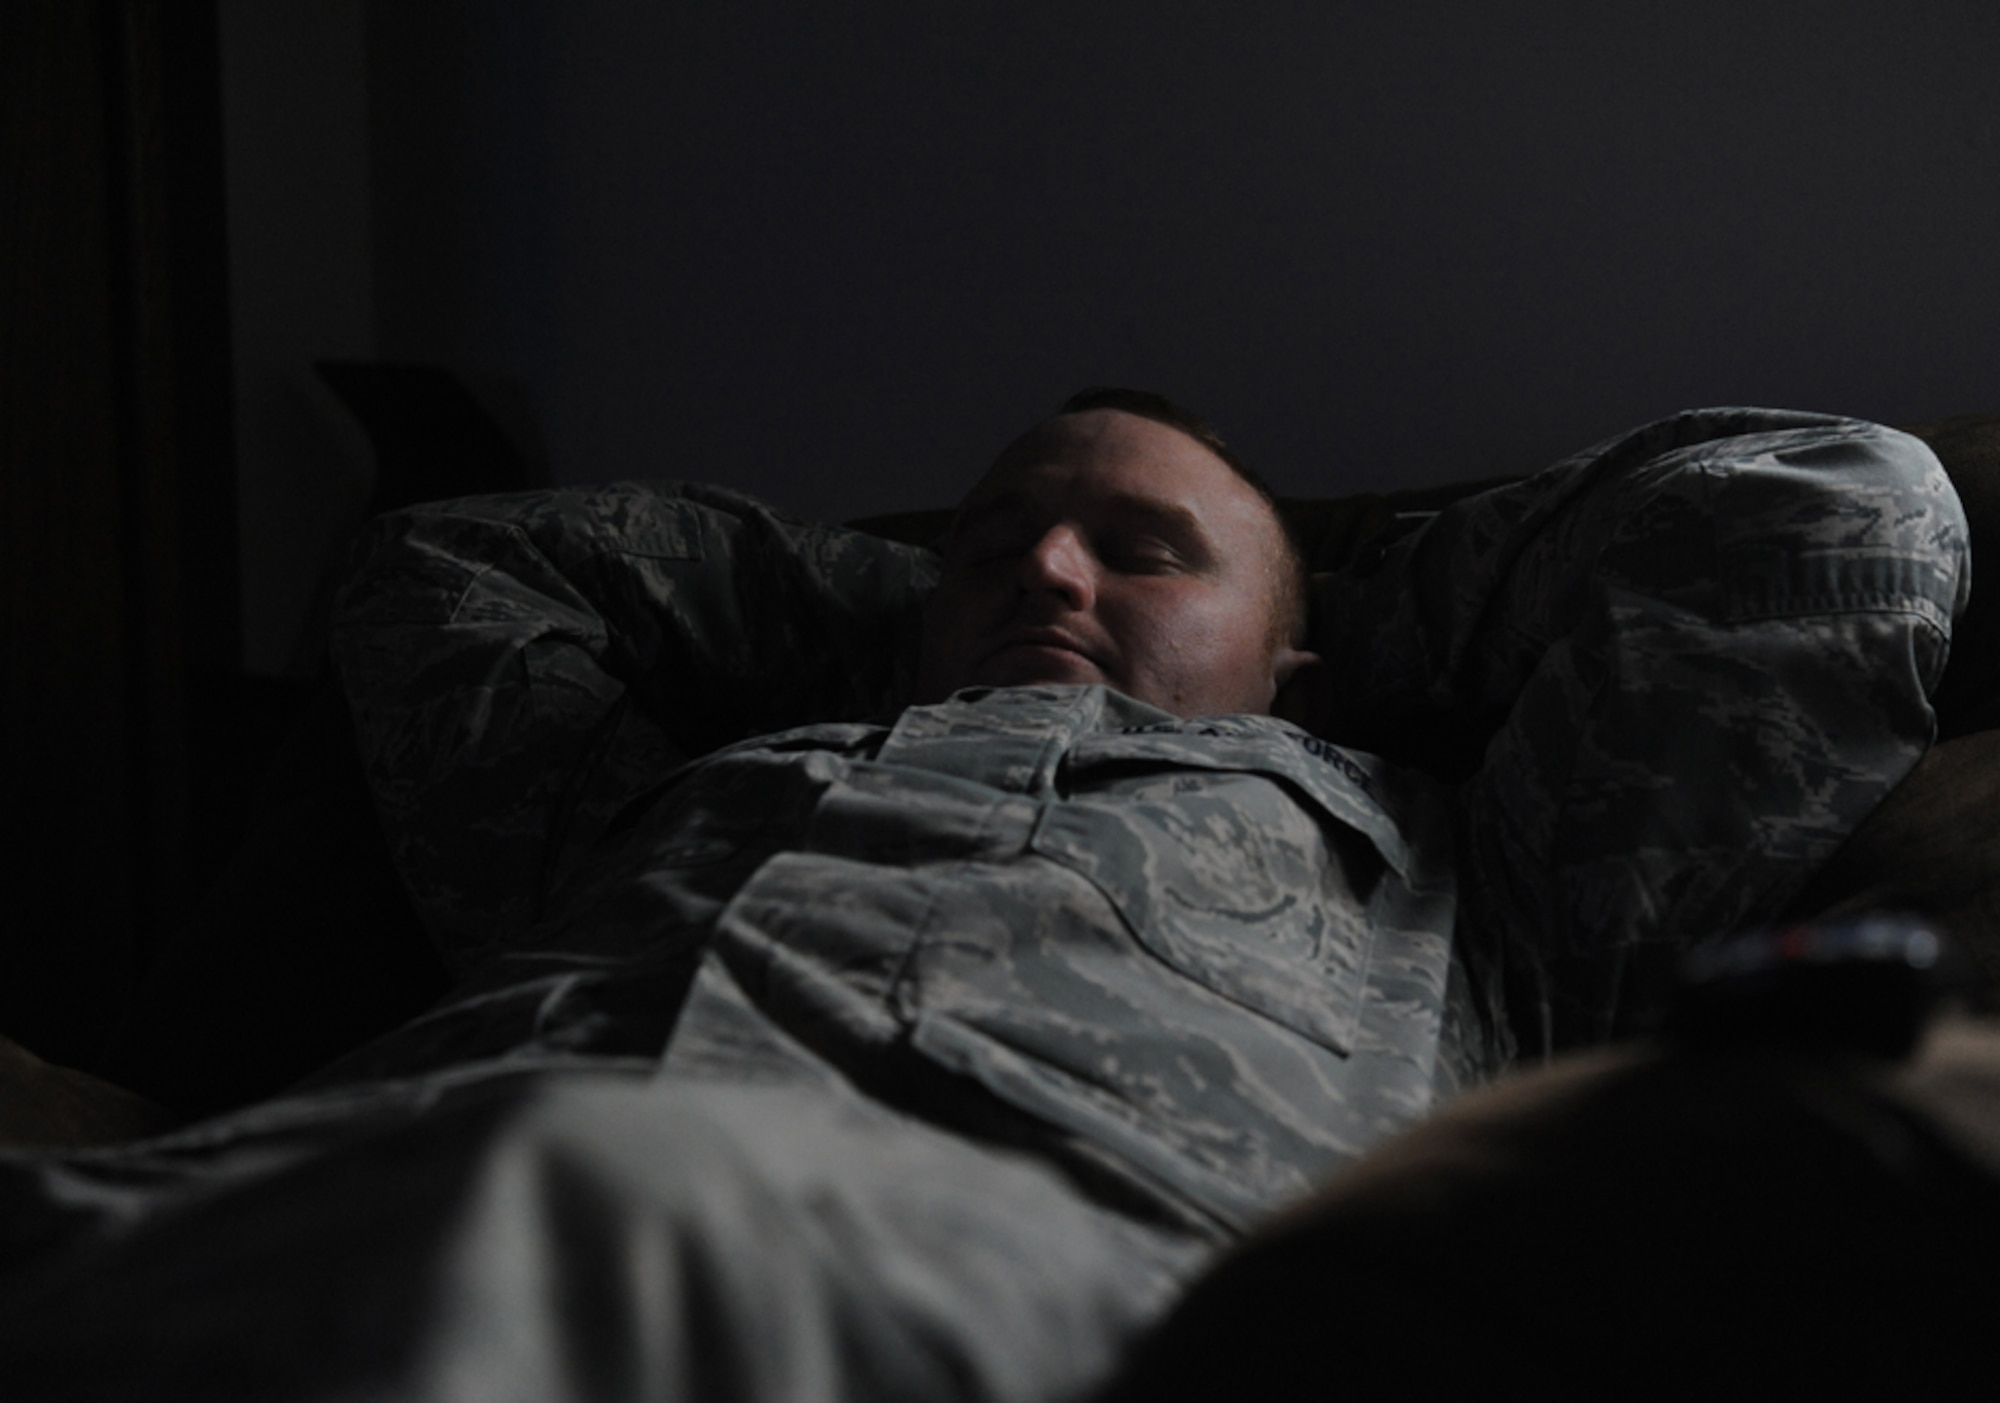 Staff Sgt. Ryan Bullard breaks for a nap at the end of the day after hosting guests at his missile alert facility and ensuring his facility manager-in-training has passed his training evaluation March 12, 2013, in Montana. Facility managers serve four days at a time at any one of the 341st Missile Wing’s 15 missile alert facilities, which are spread across 13,800 square miles of various Montana landscapes. While posted to the missile complex FMs eat, sleep, exercise and work. Bullard is a facility manager assigned to  490th Missile Squadron. (U.S. Air Force photo/Staff Sgt. R.J. Biermann)